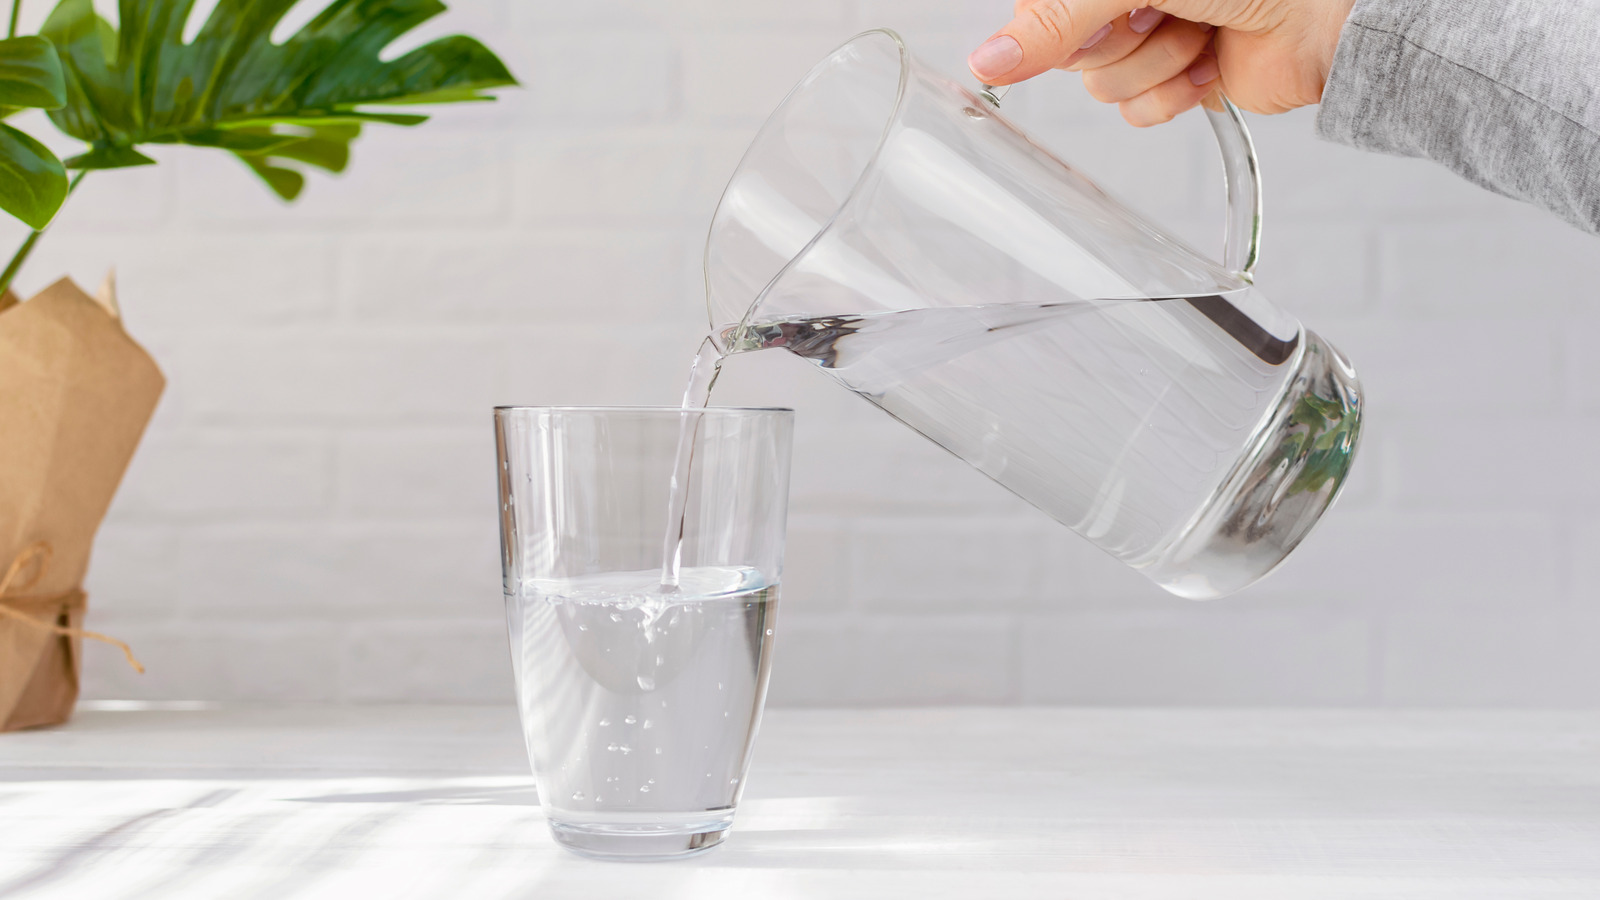 So You’re a Trivia Expert? Prove It by Answering All 22 of These True/False Questions Correctly Water glass